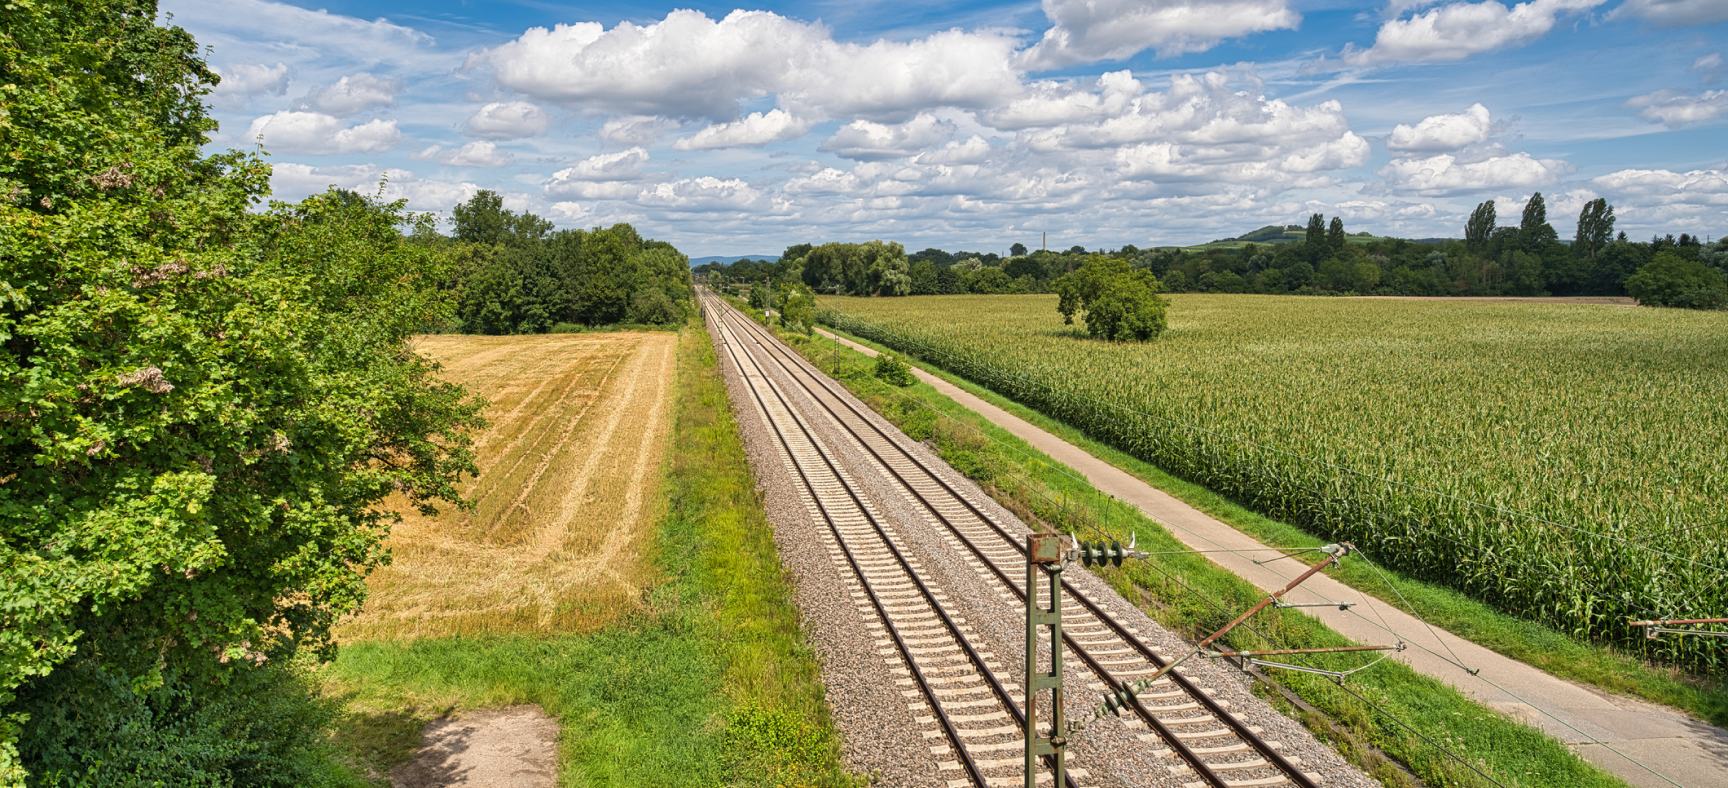 Wide angle view of train tracks with overhead electrical wires passing between fields into the horizon.